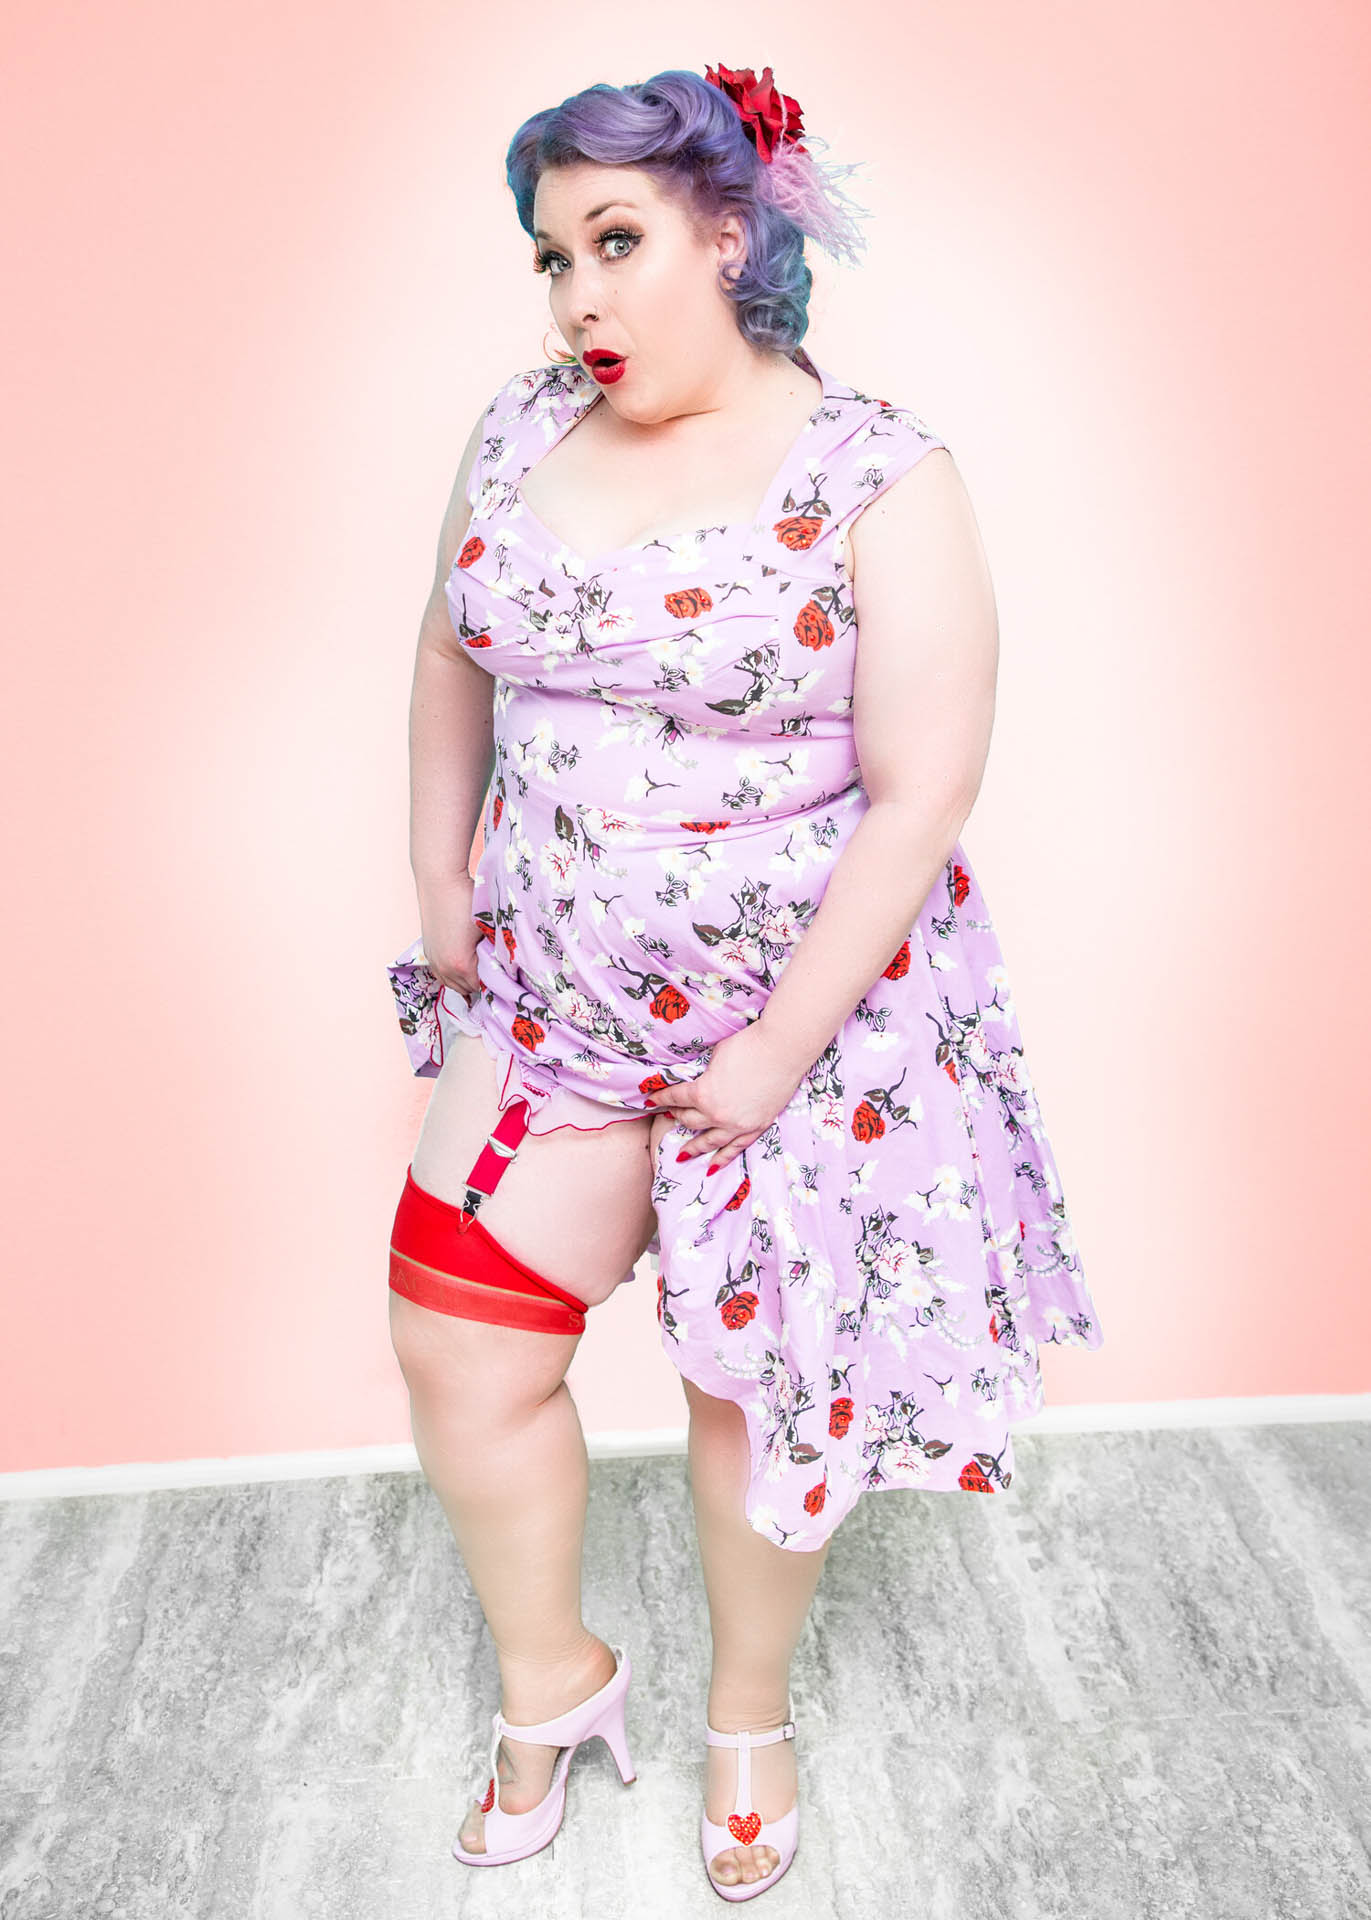 pinup shot by emerald fox